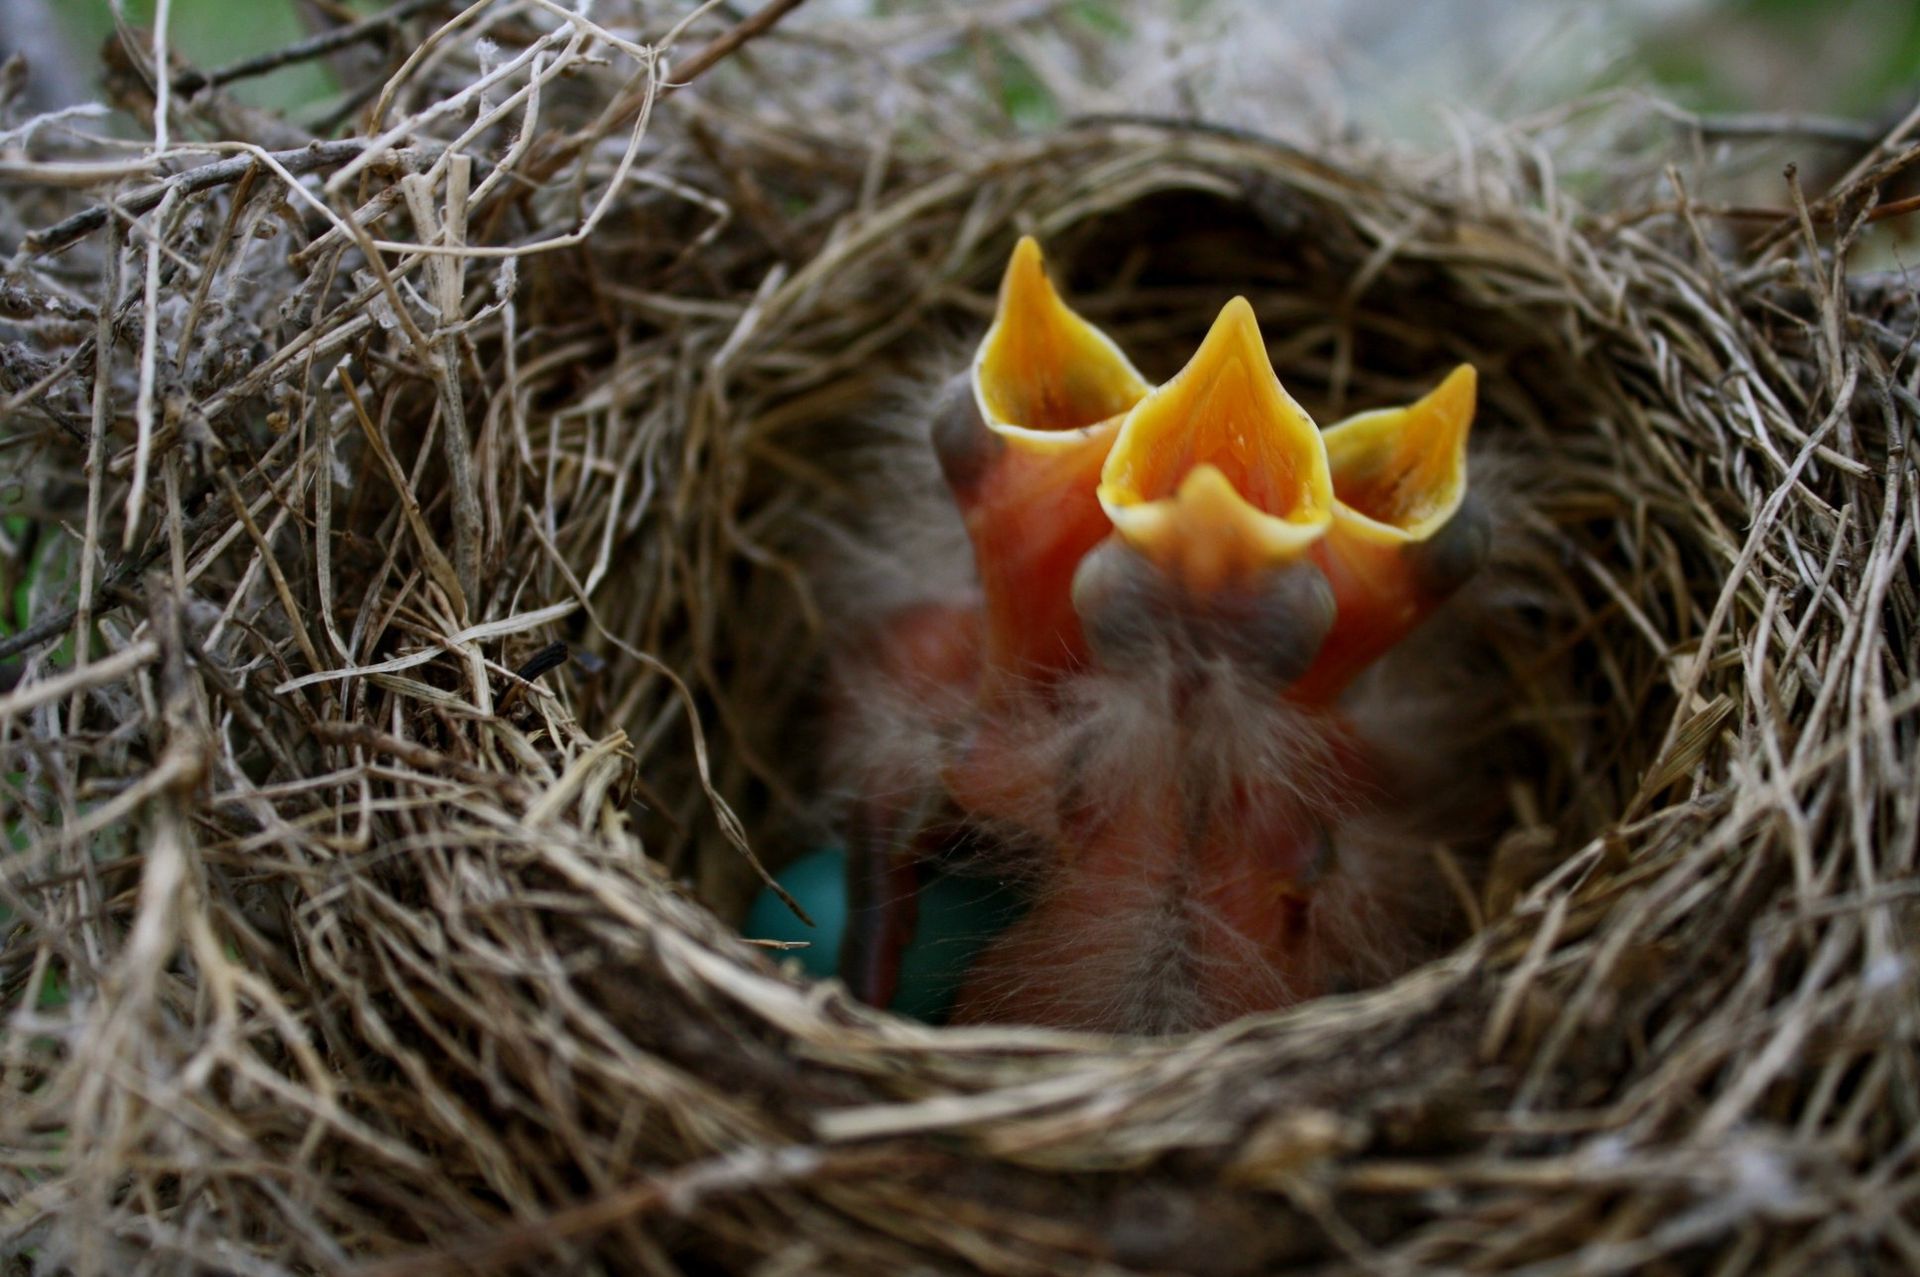 Three baby robins in a nest with their beaks wide open.